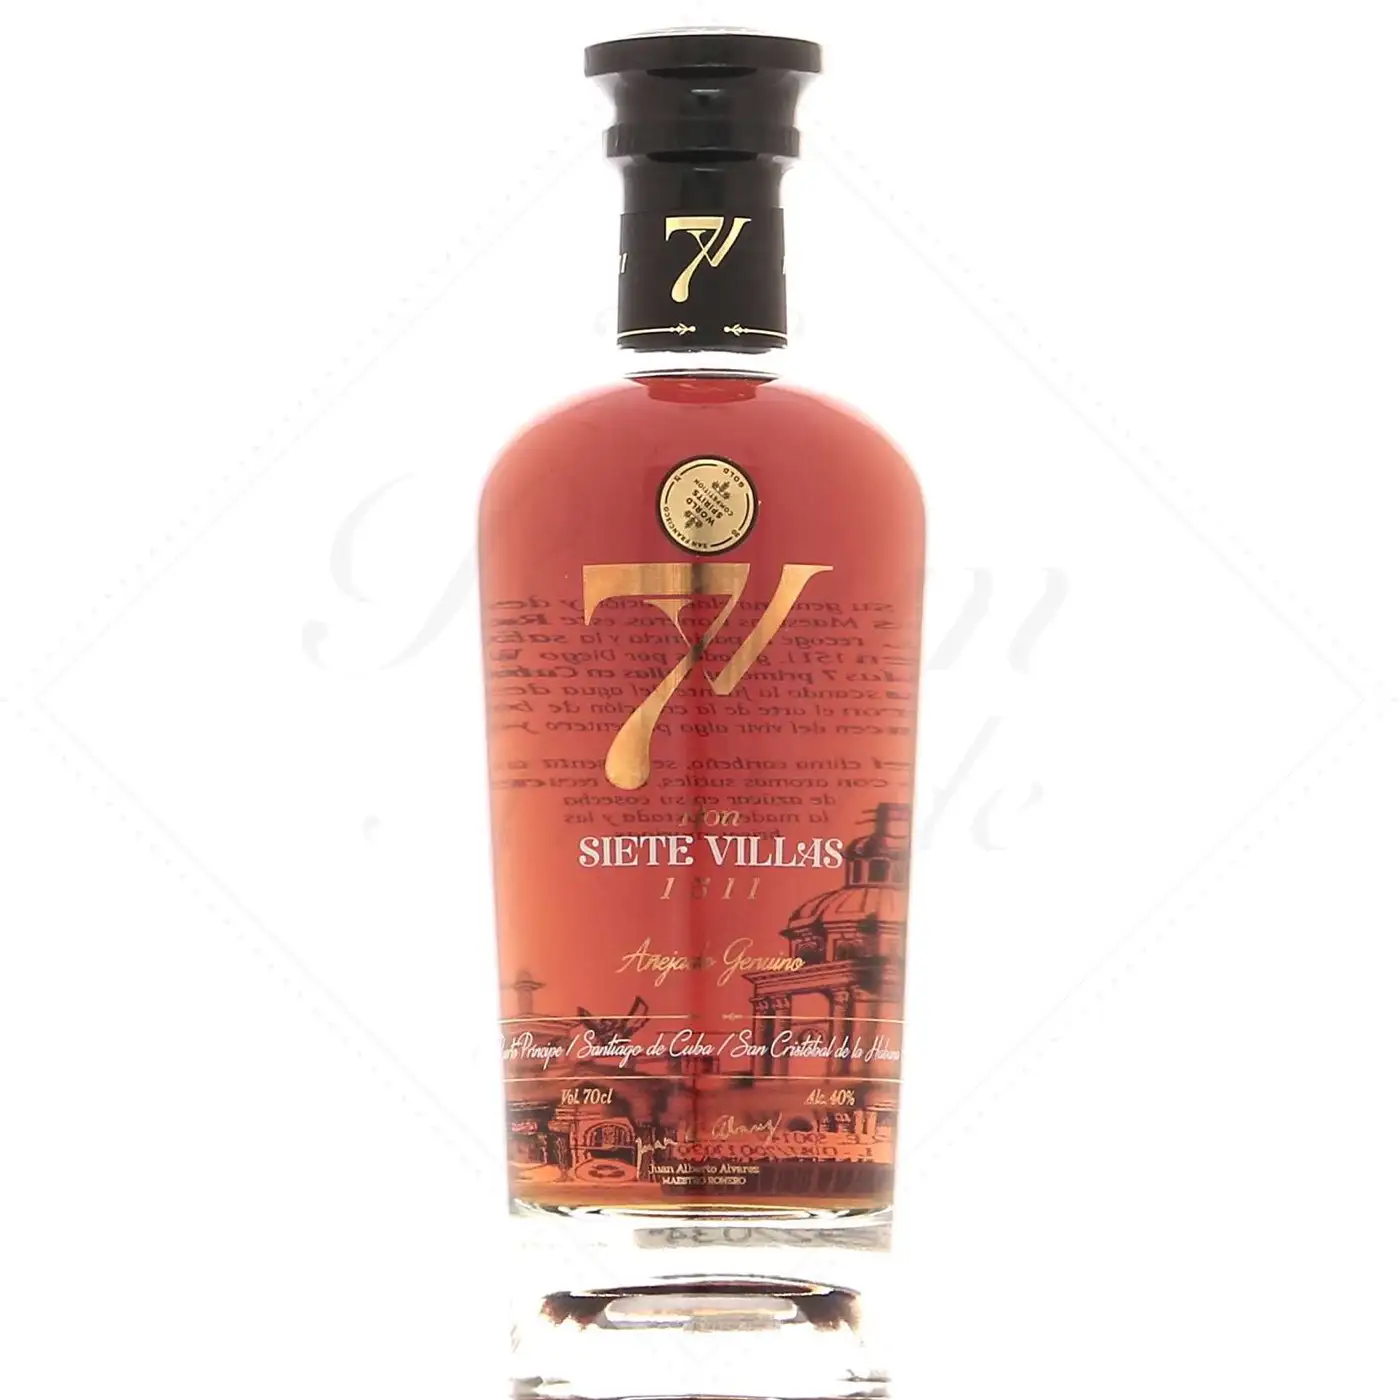 Image of the front of the bottle of the rum Ron Siete Villas Añejado